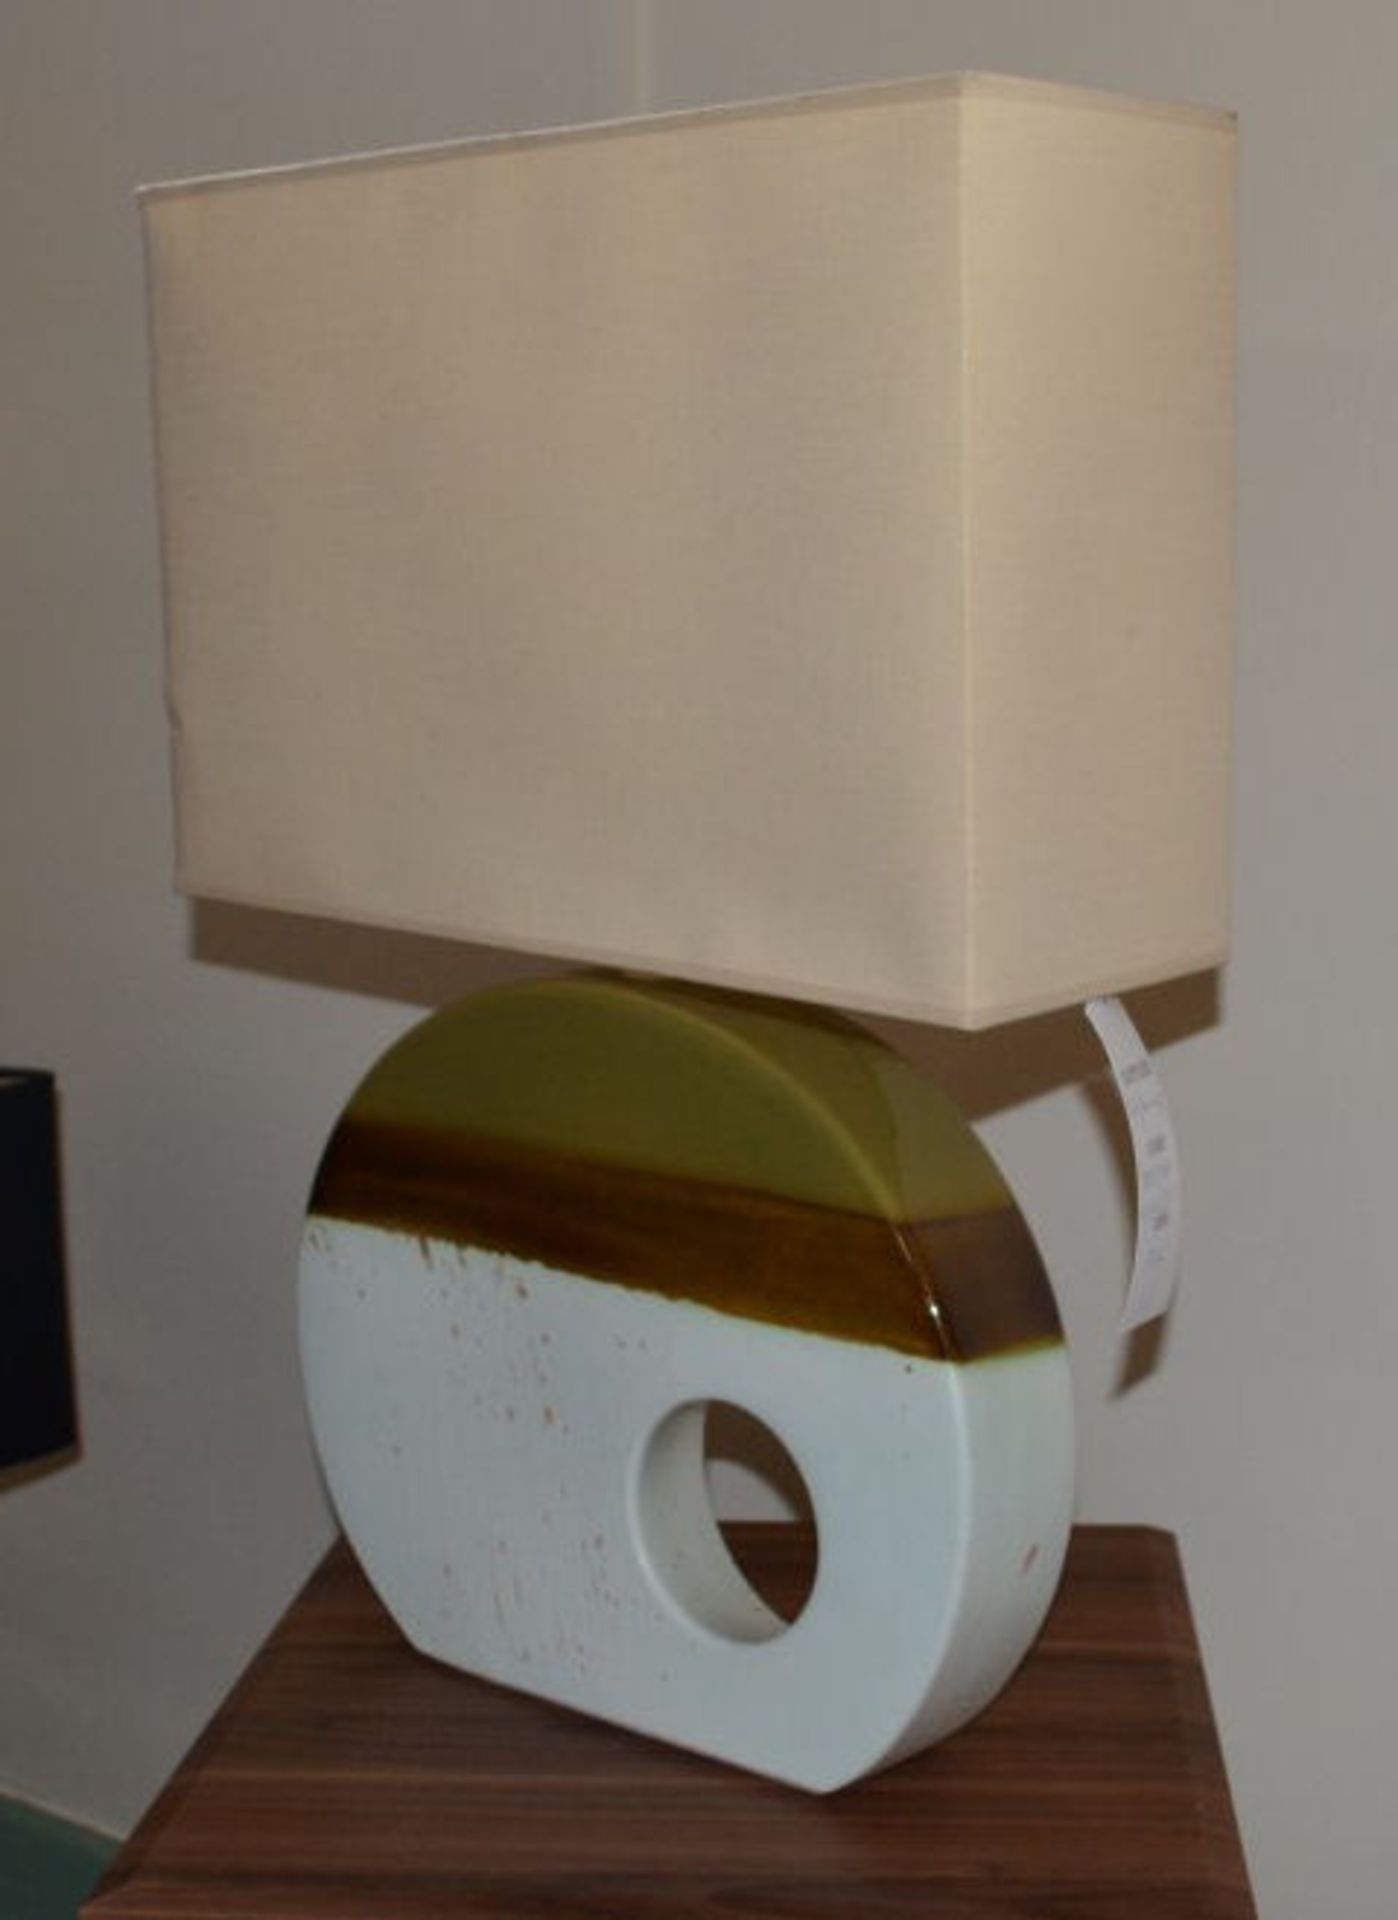 1 x Medium Sized Lamp. Concept For Living. Oval Base. White And Brown With A Cream Coloured Shade. - Image 2 of 2